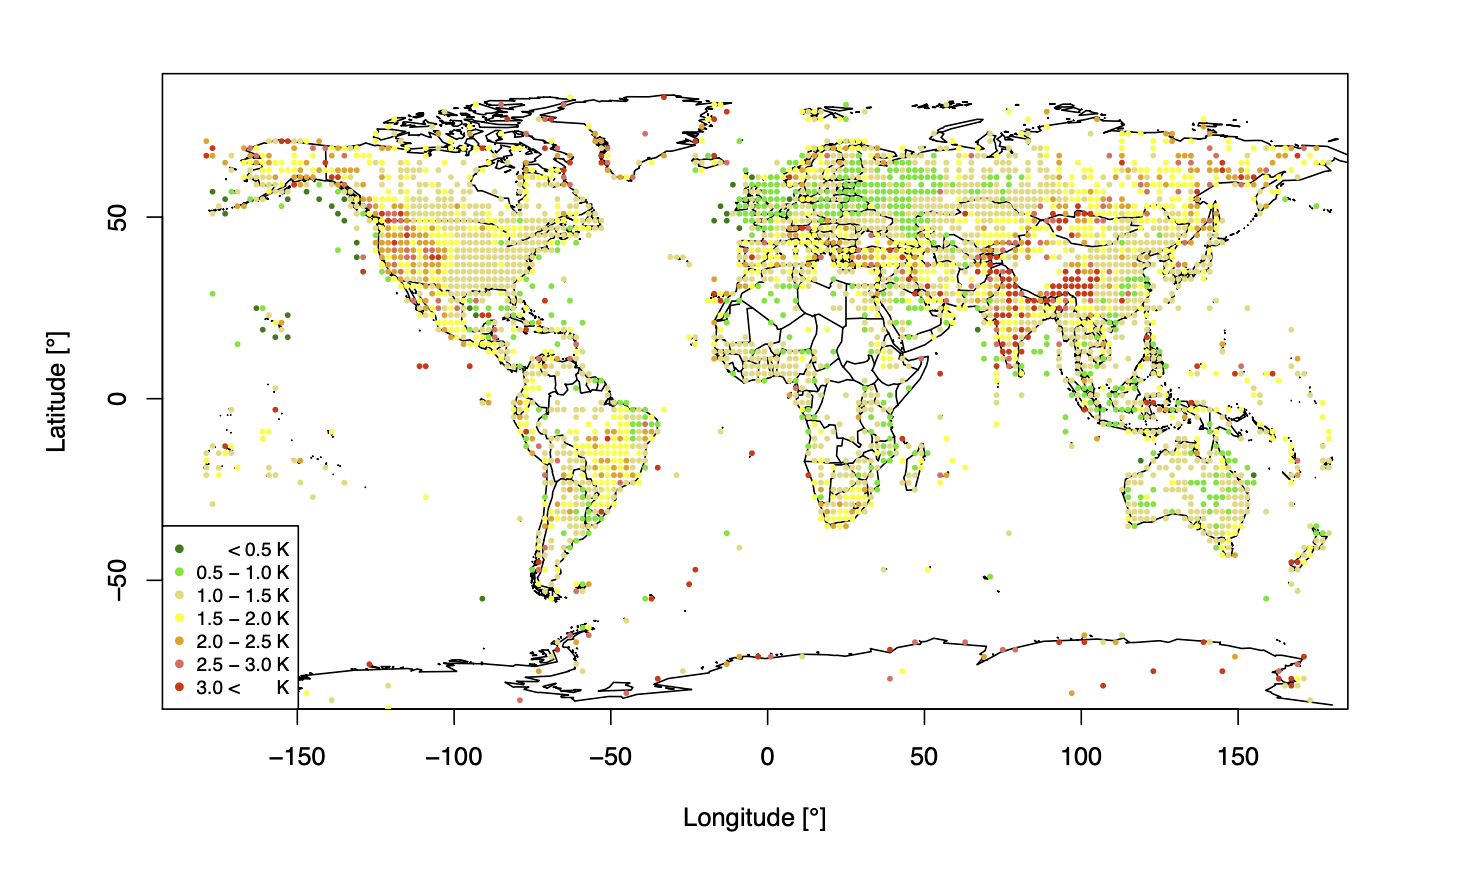 Spatial distribution of the MAE [K] for NEMS (top) and ERA5 (bottom), 
calculated for measurements of the year 2018 of over 8000 weather stations worldwide.